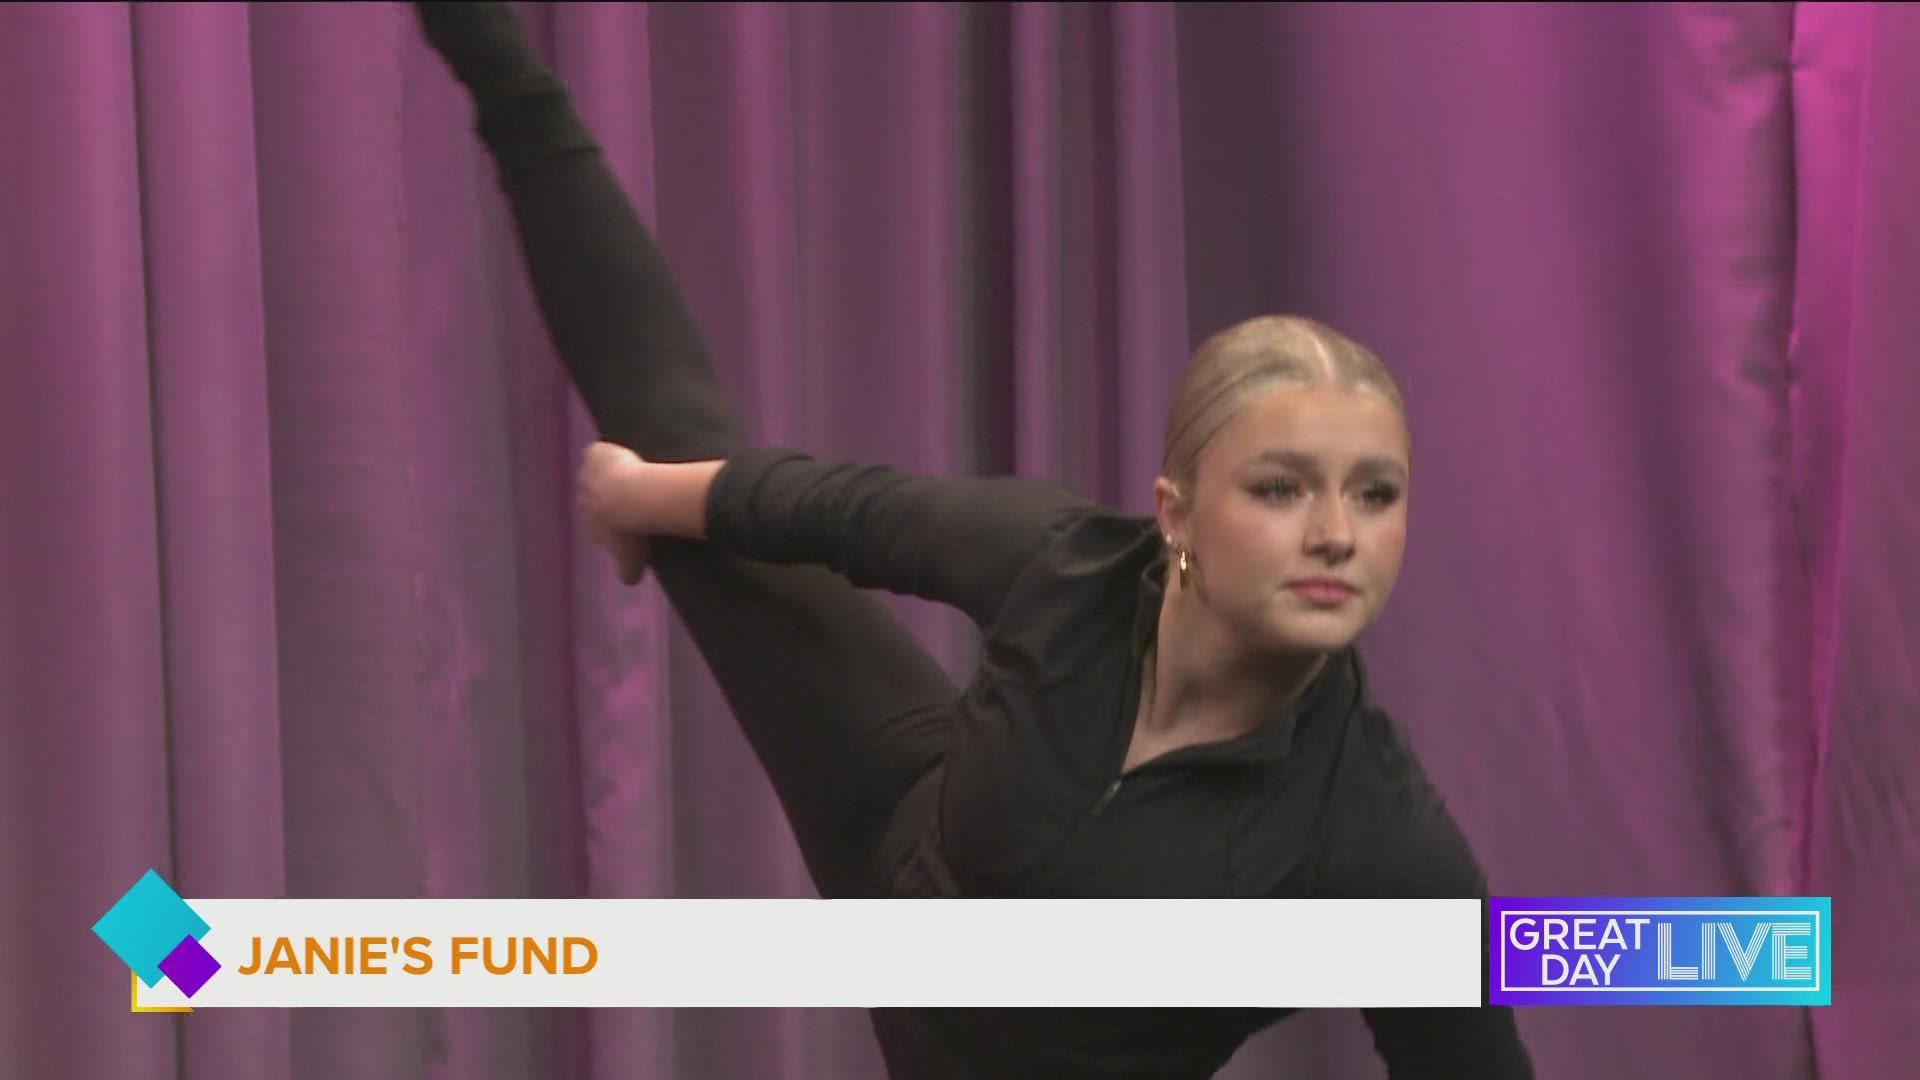 Dancers from Tampa Bay’s BSDA are leaving it all on the dance floor to raise money and awareness for abused and neglected girls.